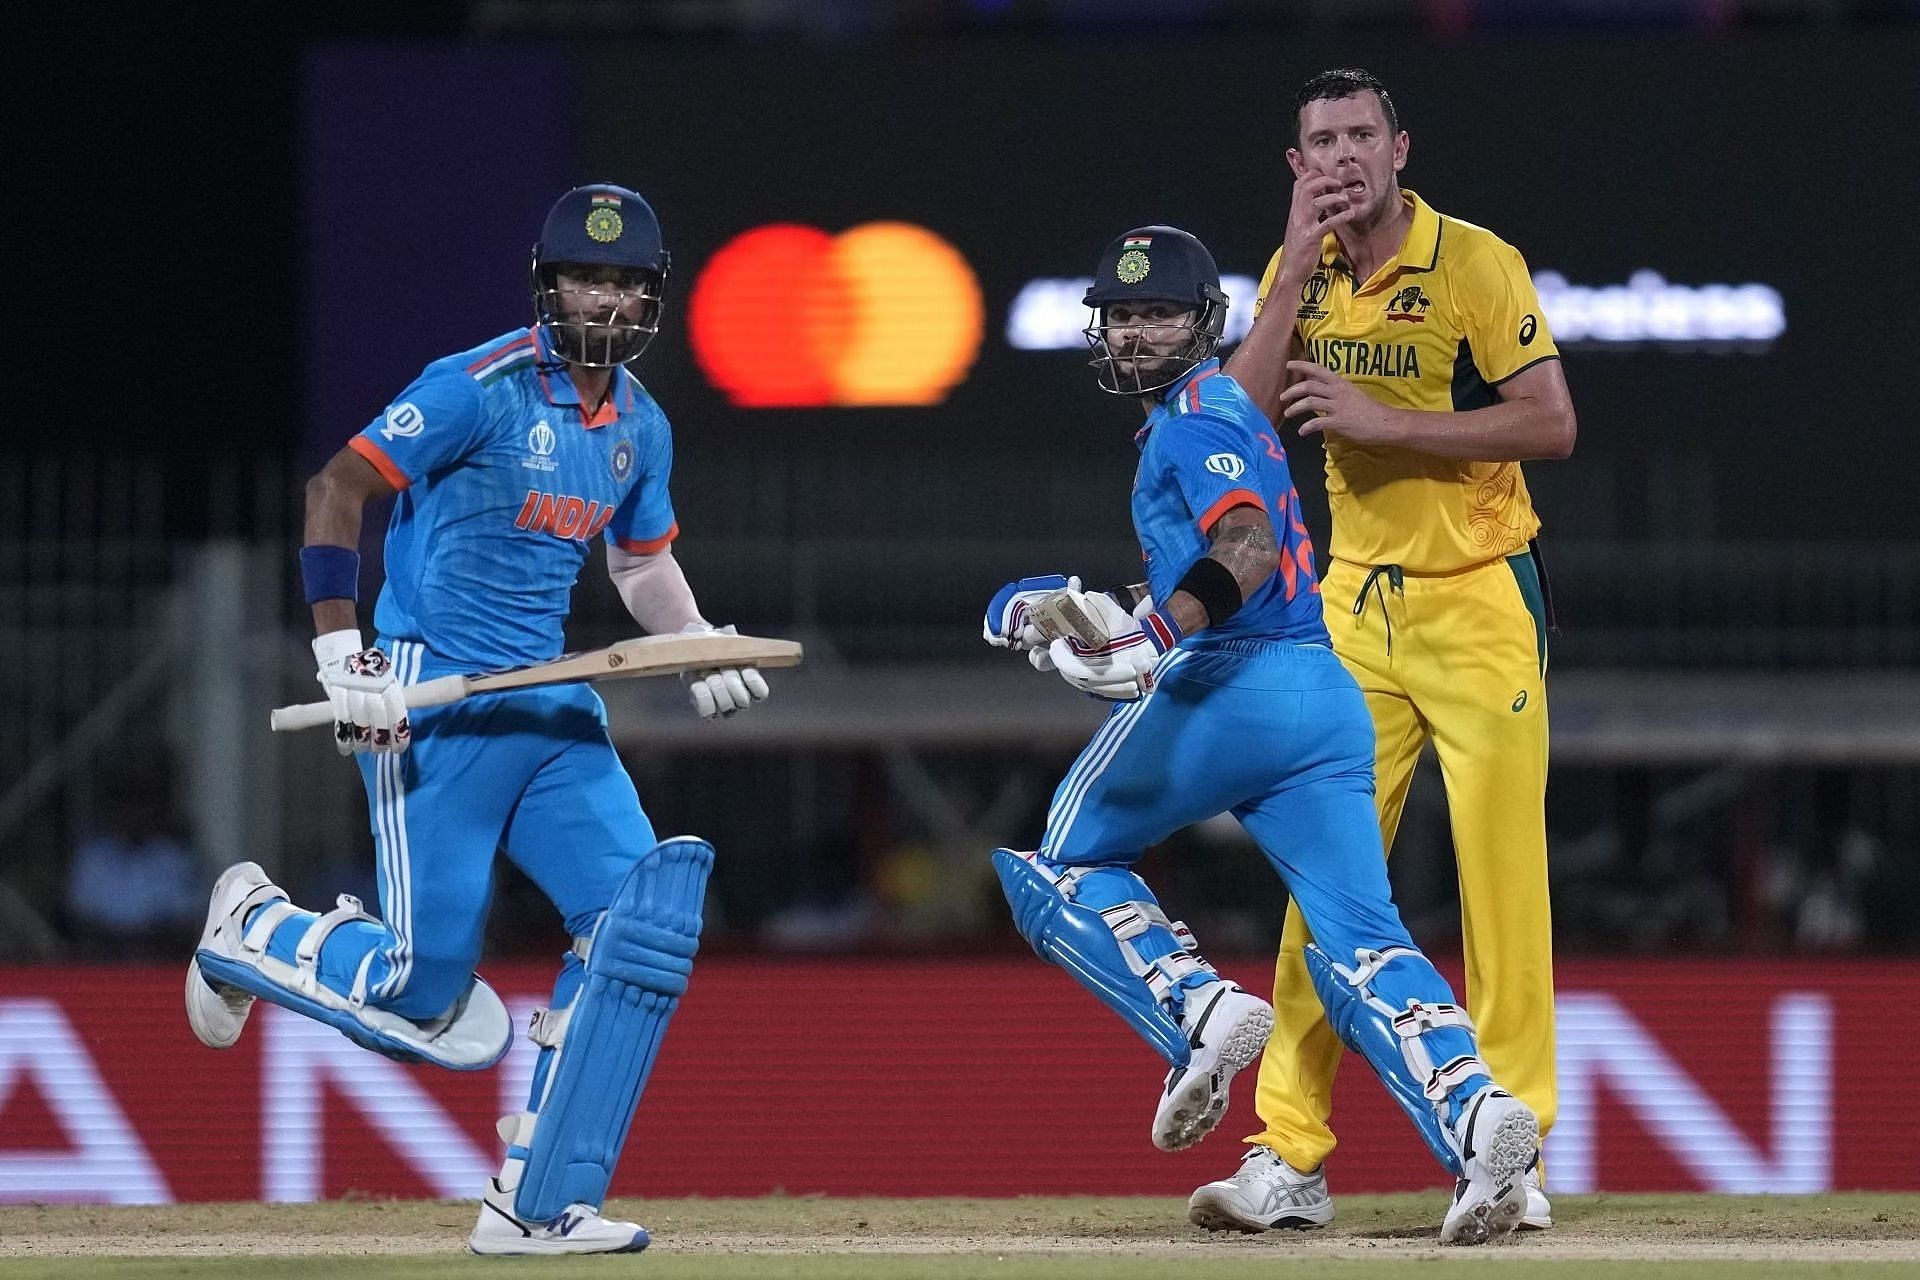 India started their 2023 World Cup campaign with a win against Australia. [P/C: AP]